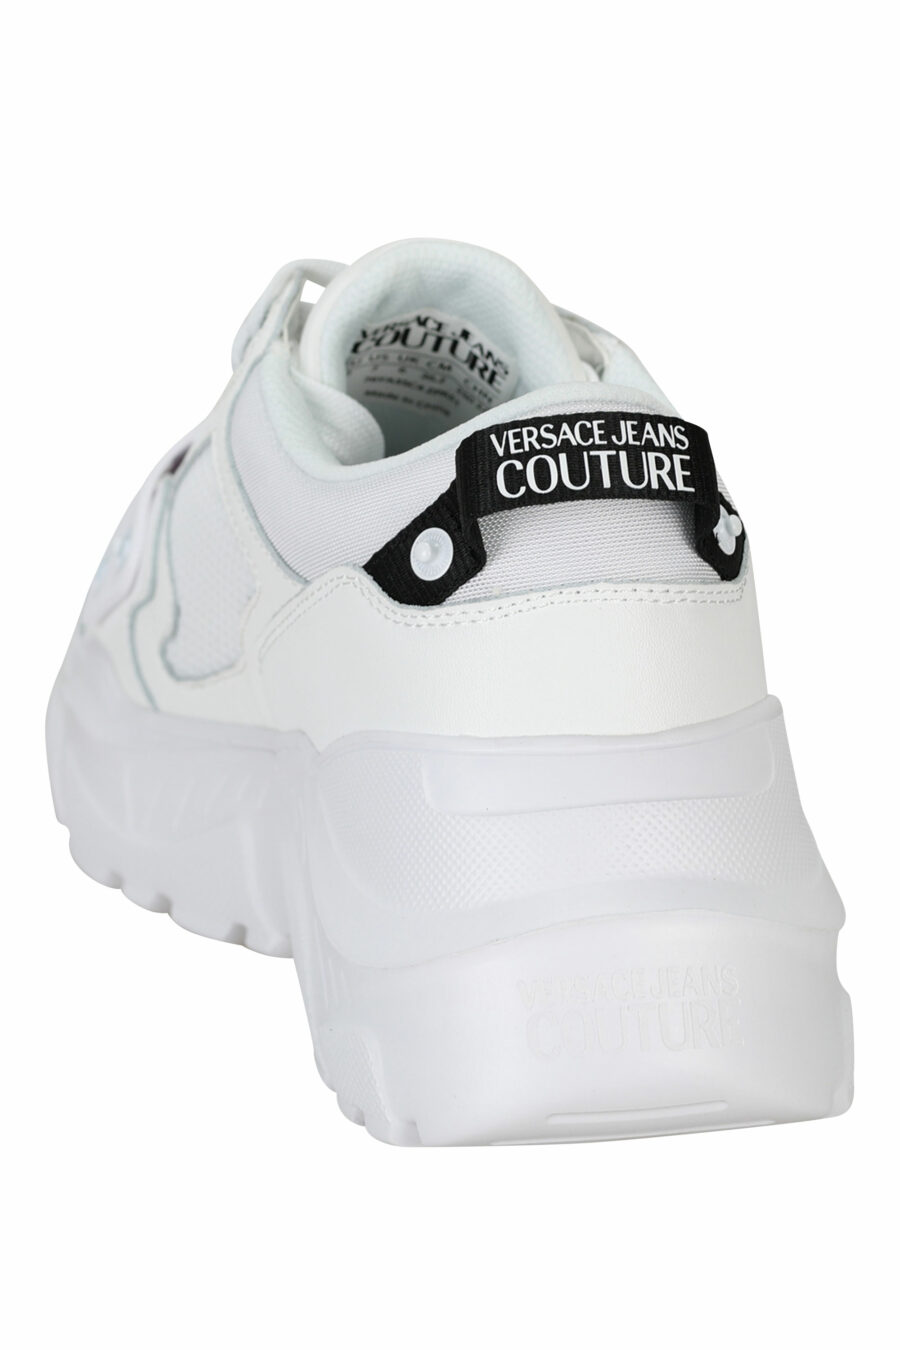 White "speedtrack" shoes with black rubber mini-logo on the front - 8052019604337 3